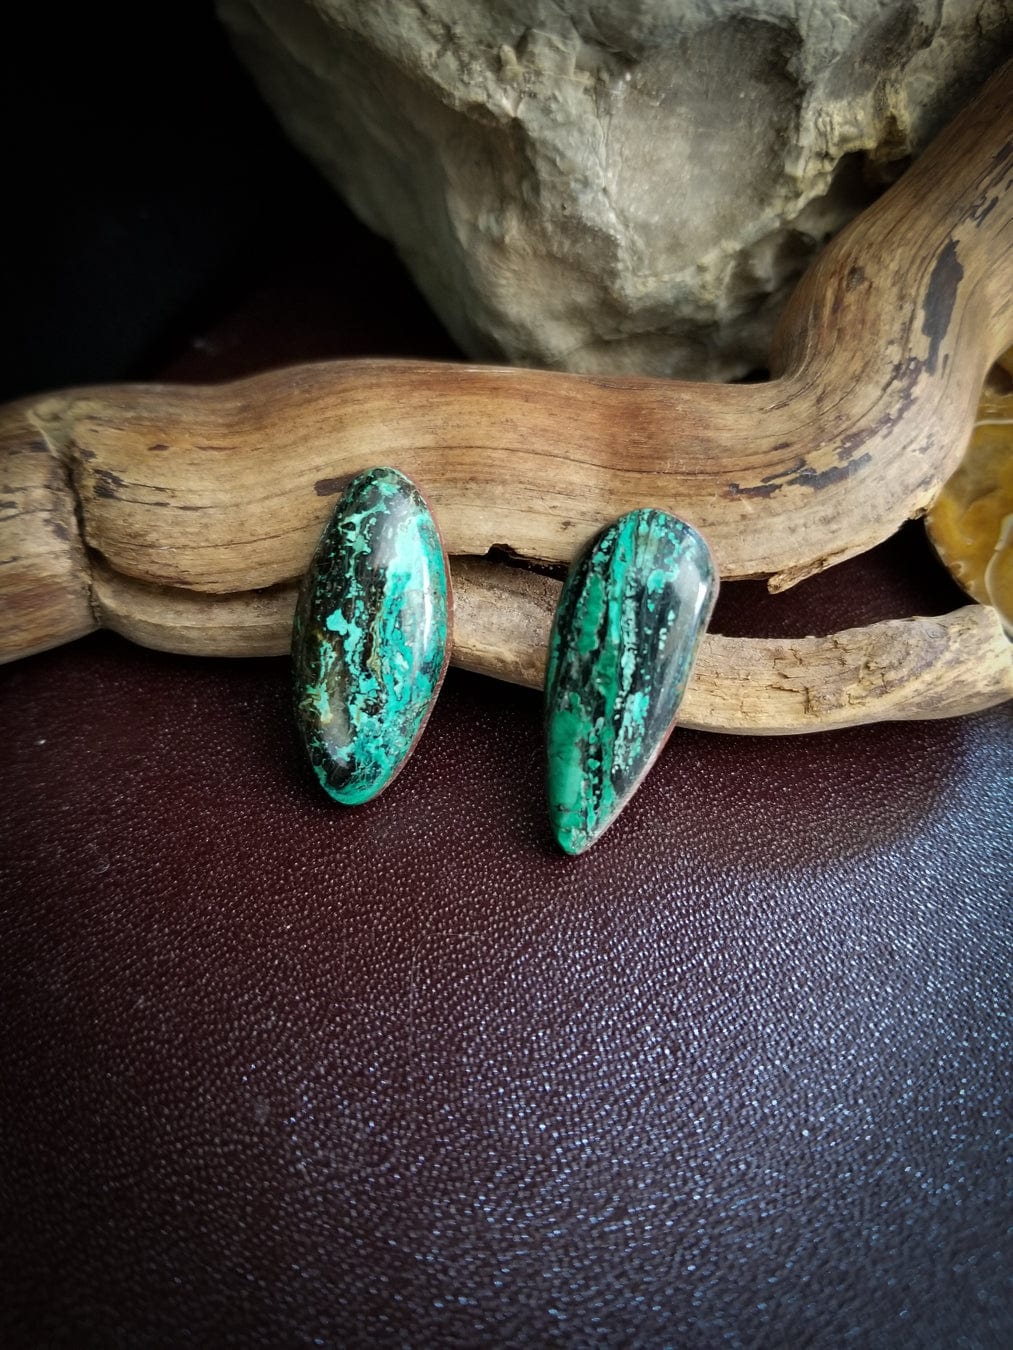 Chrysocolla oval and teardrop shaped cabochons. Green, turquoise and black